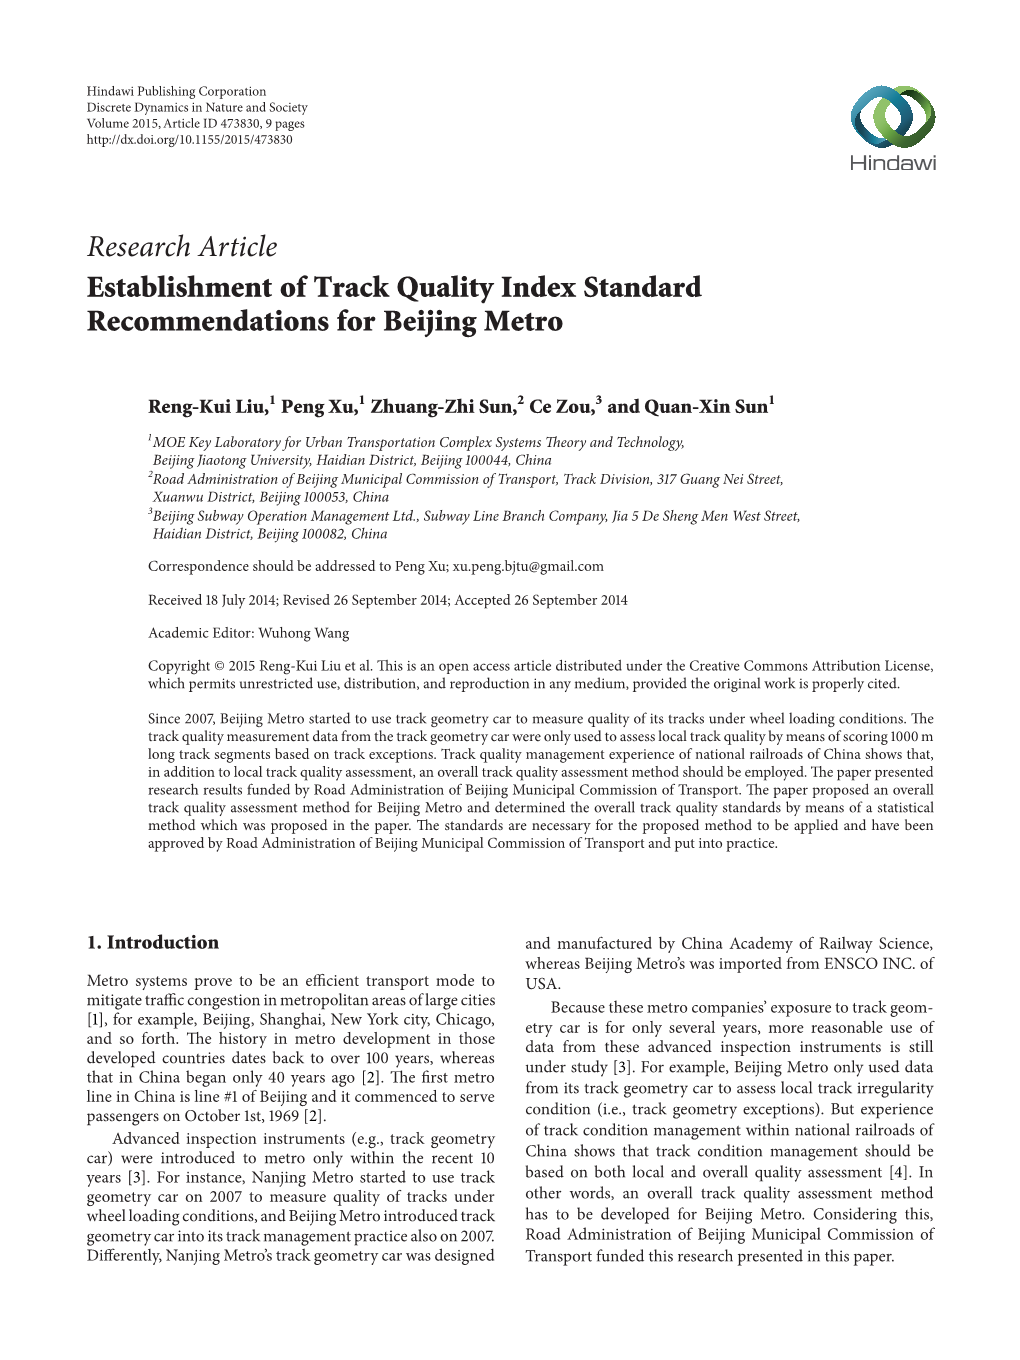 Research Article Establishment of Track Quality Index Standard Recommendations for Beijing Metro